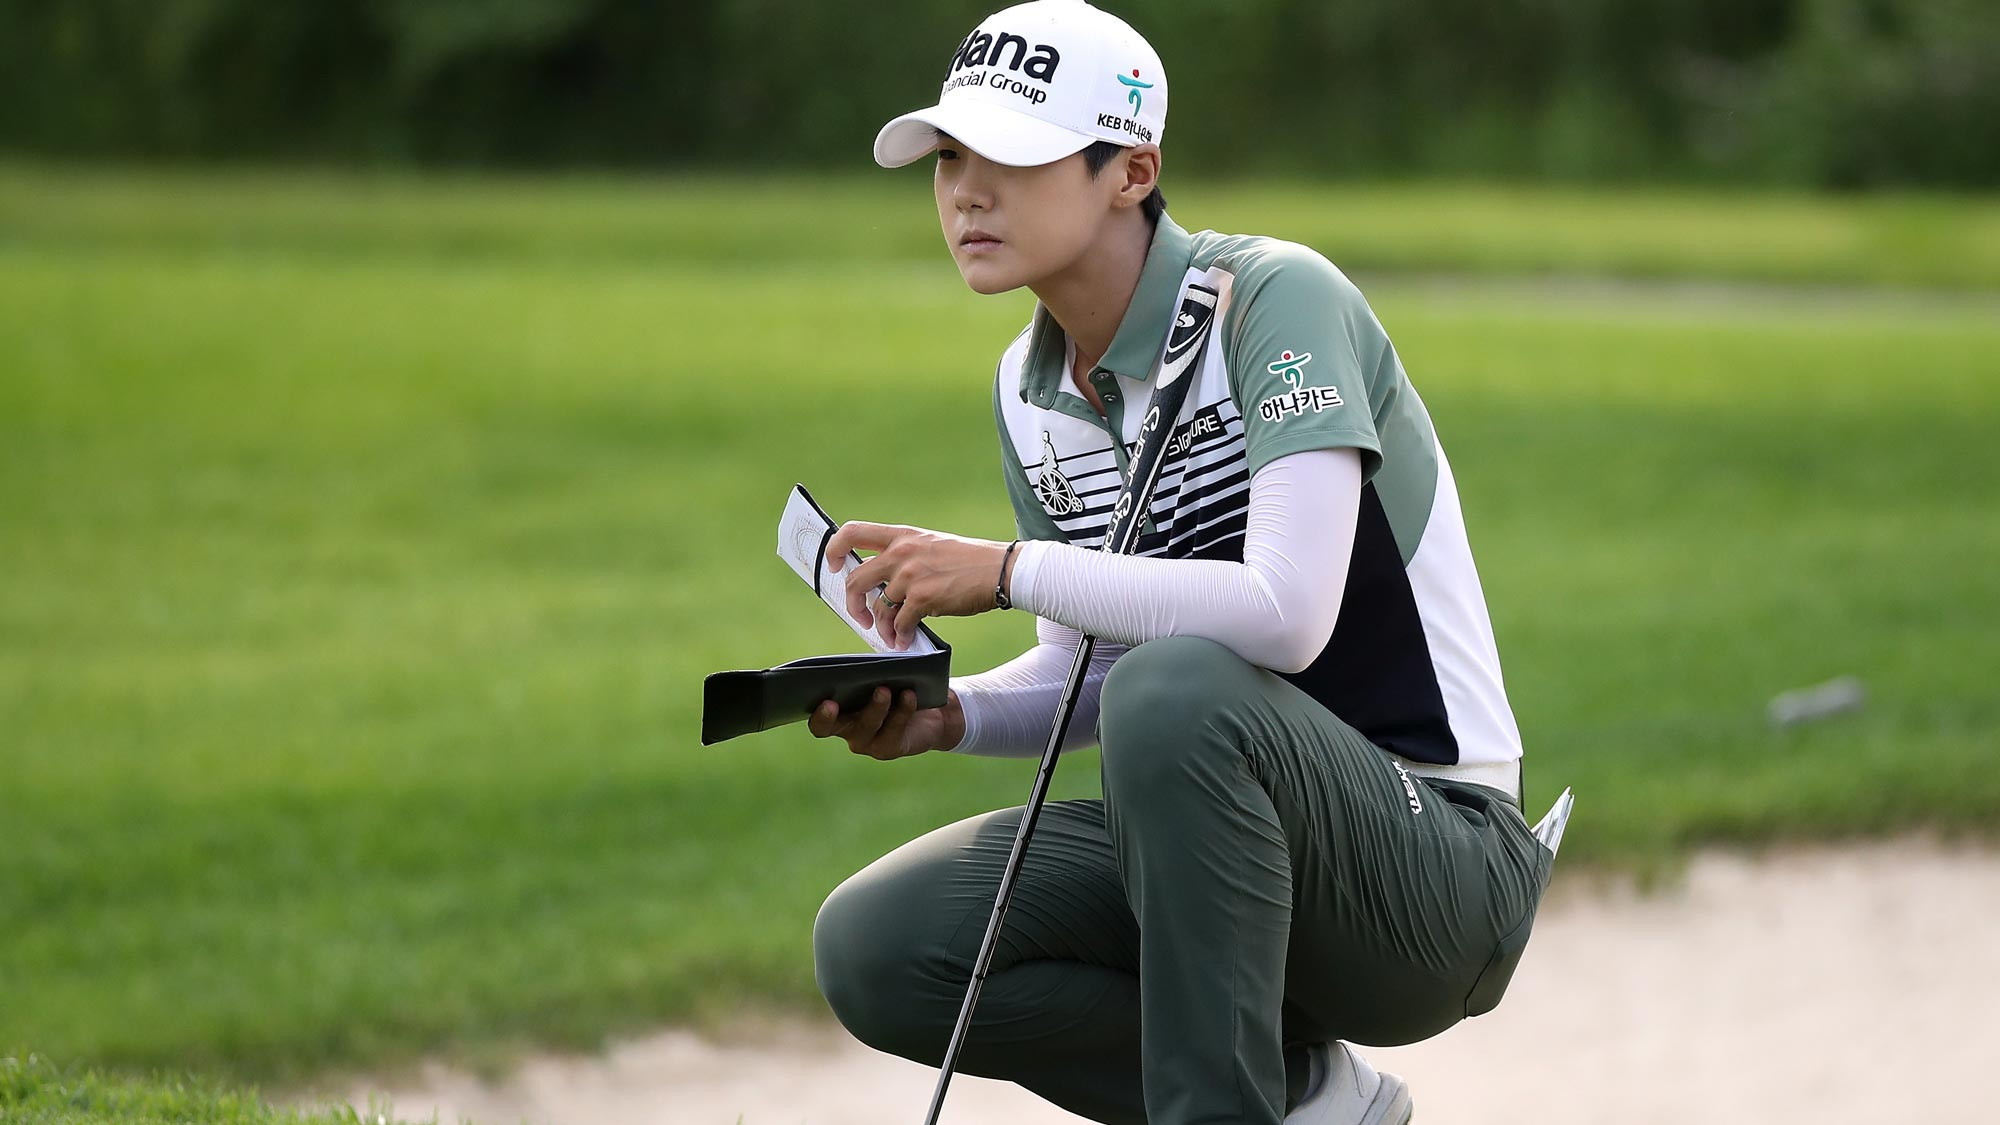 South Korea's Sung Hyun Park carded a bogey free 66 on day one to top the leaderboard at the Women's PGA Championship at Kemper Lakes ©LPGA